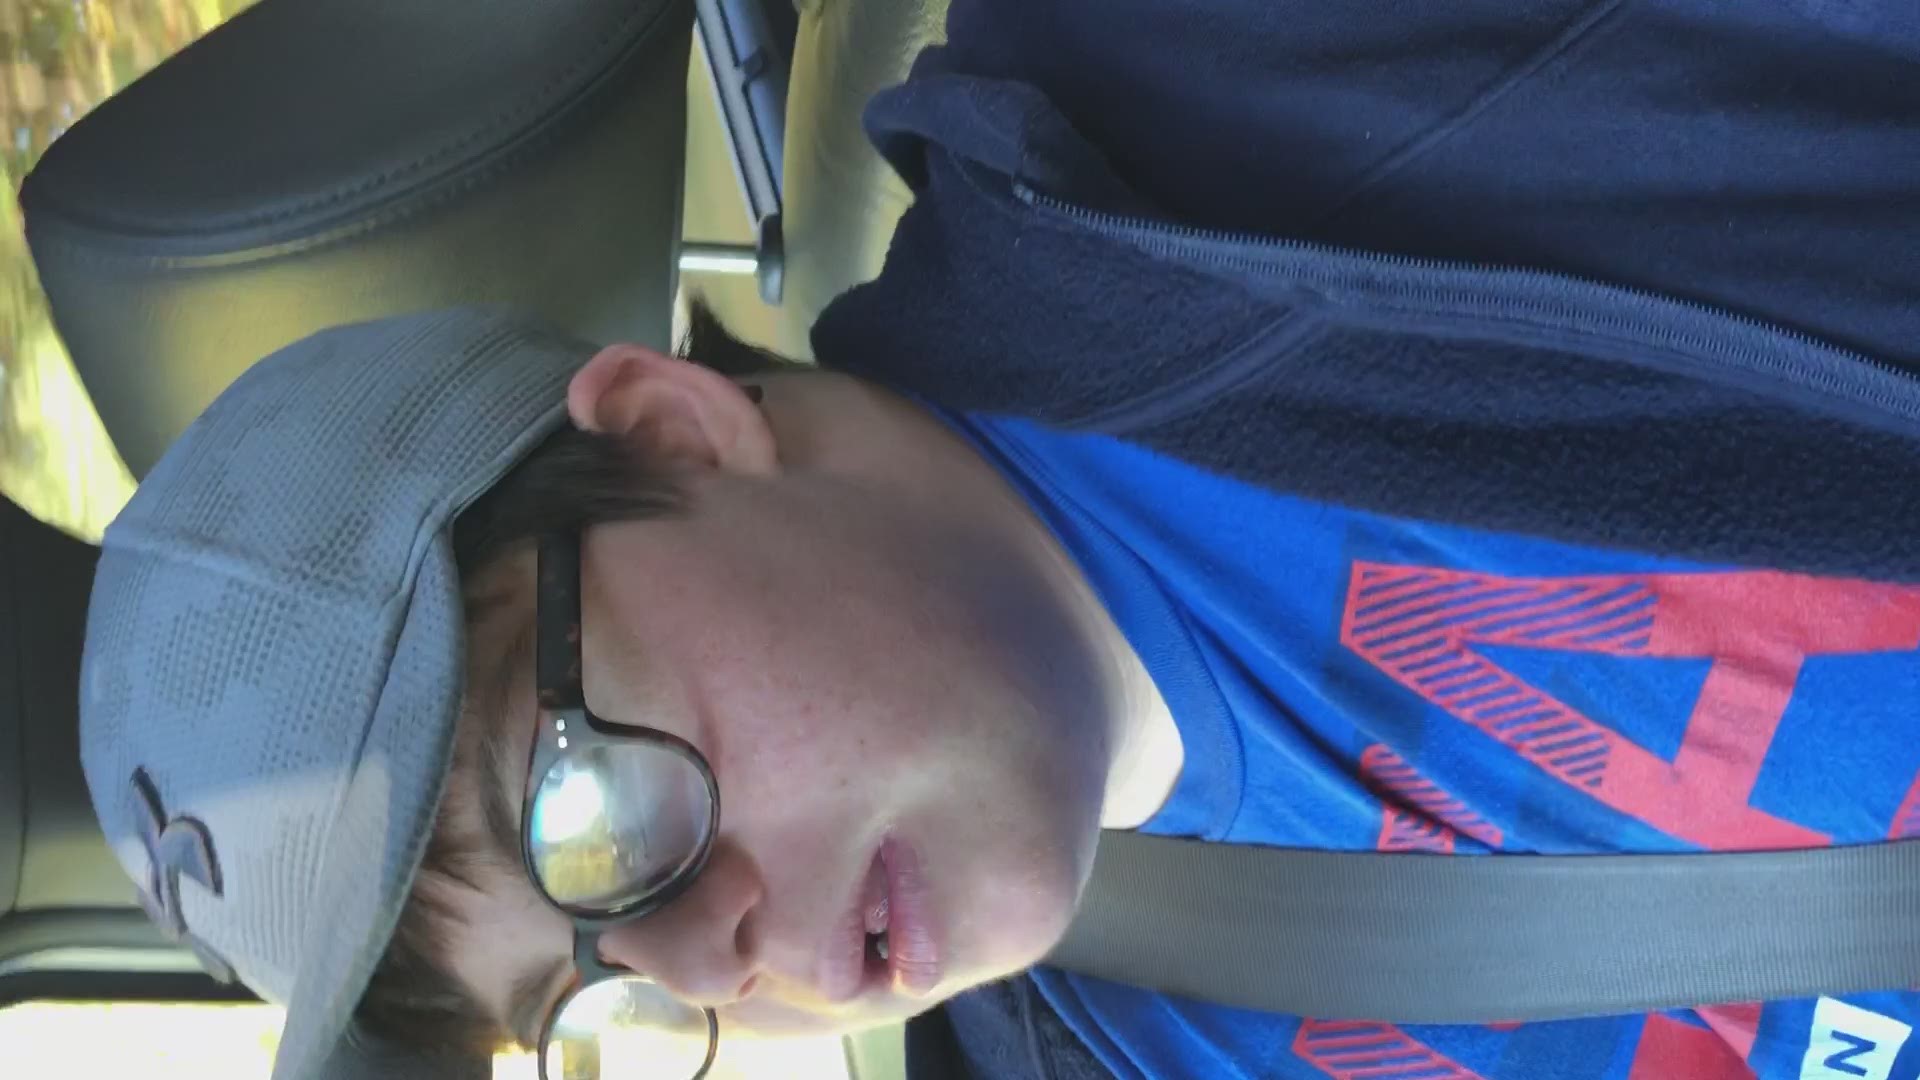 Jake Manning's personality shines while he has fun singing in the car.